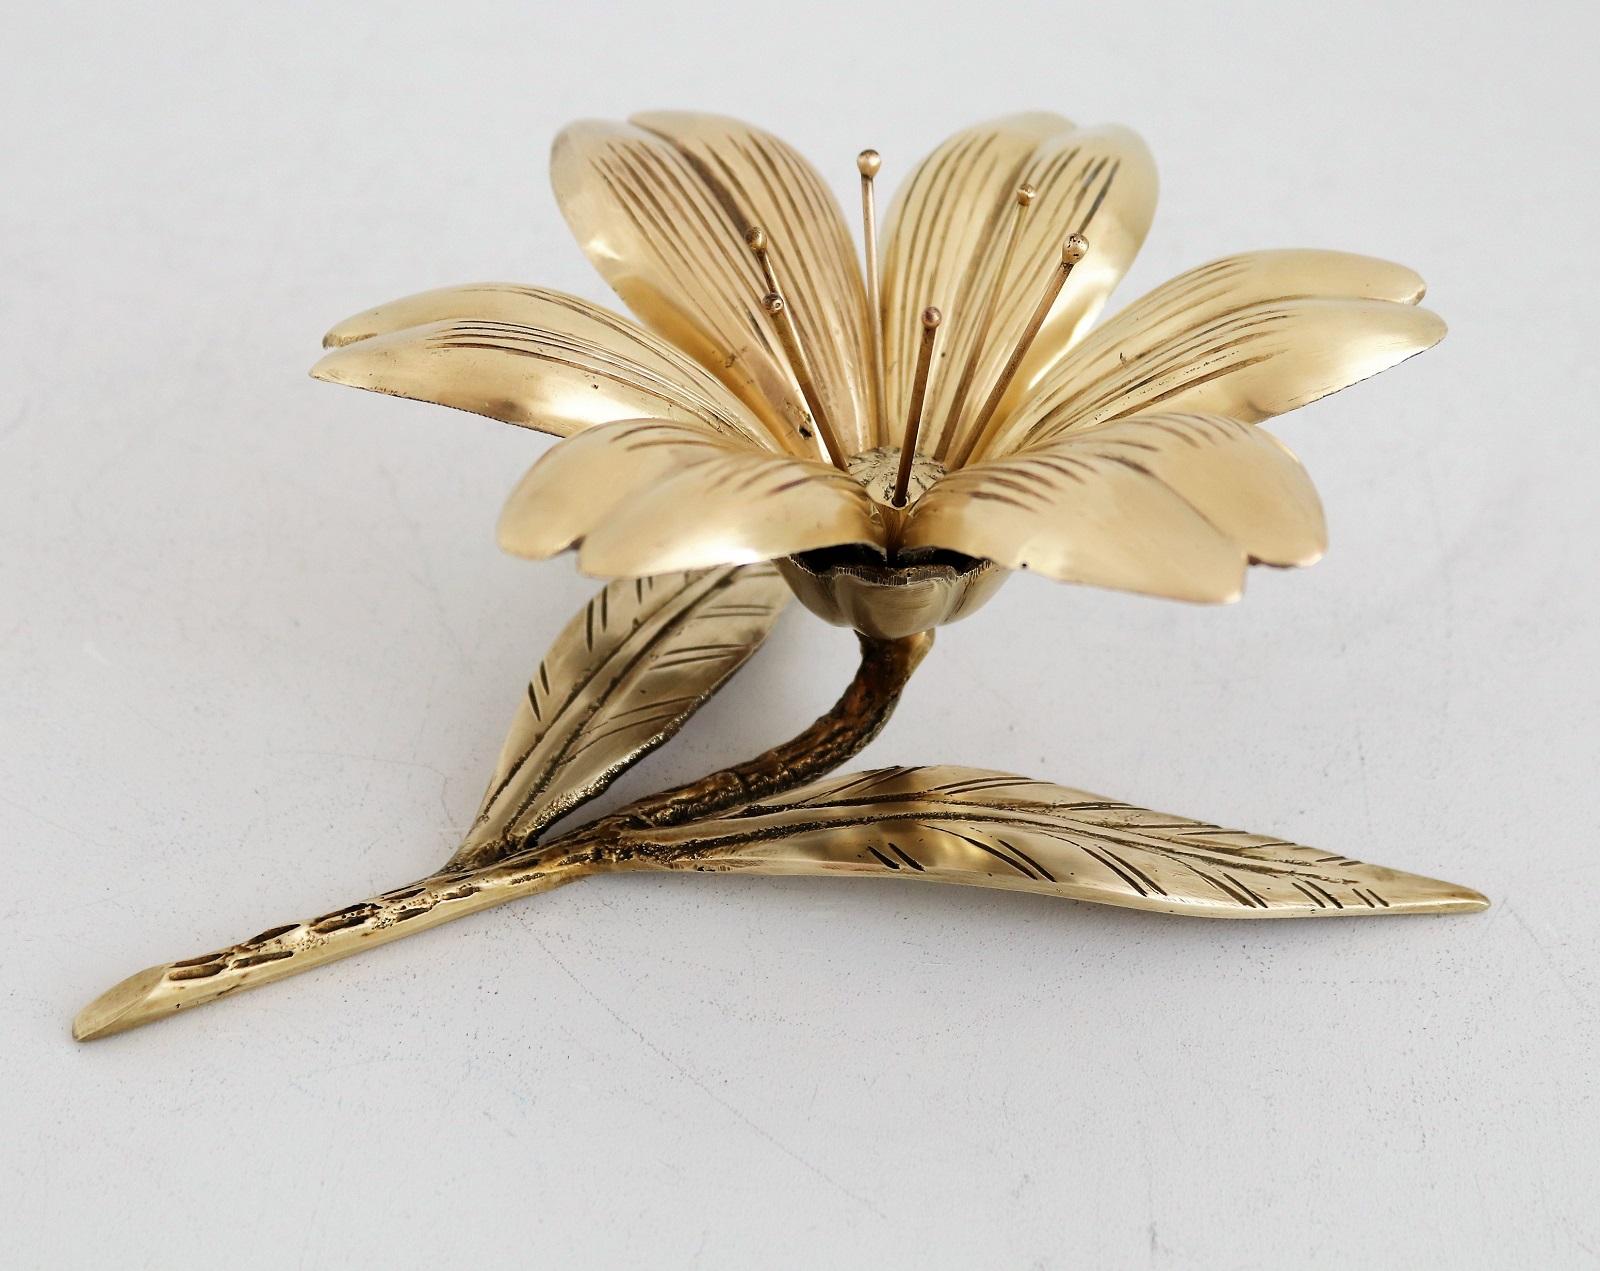 Italian Midcentury Flower in Brass with Petal Ashtrays for Cigarettes, 1950s 10